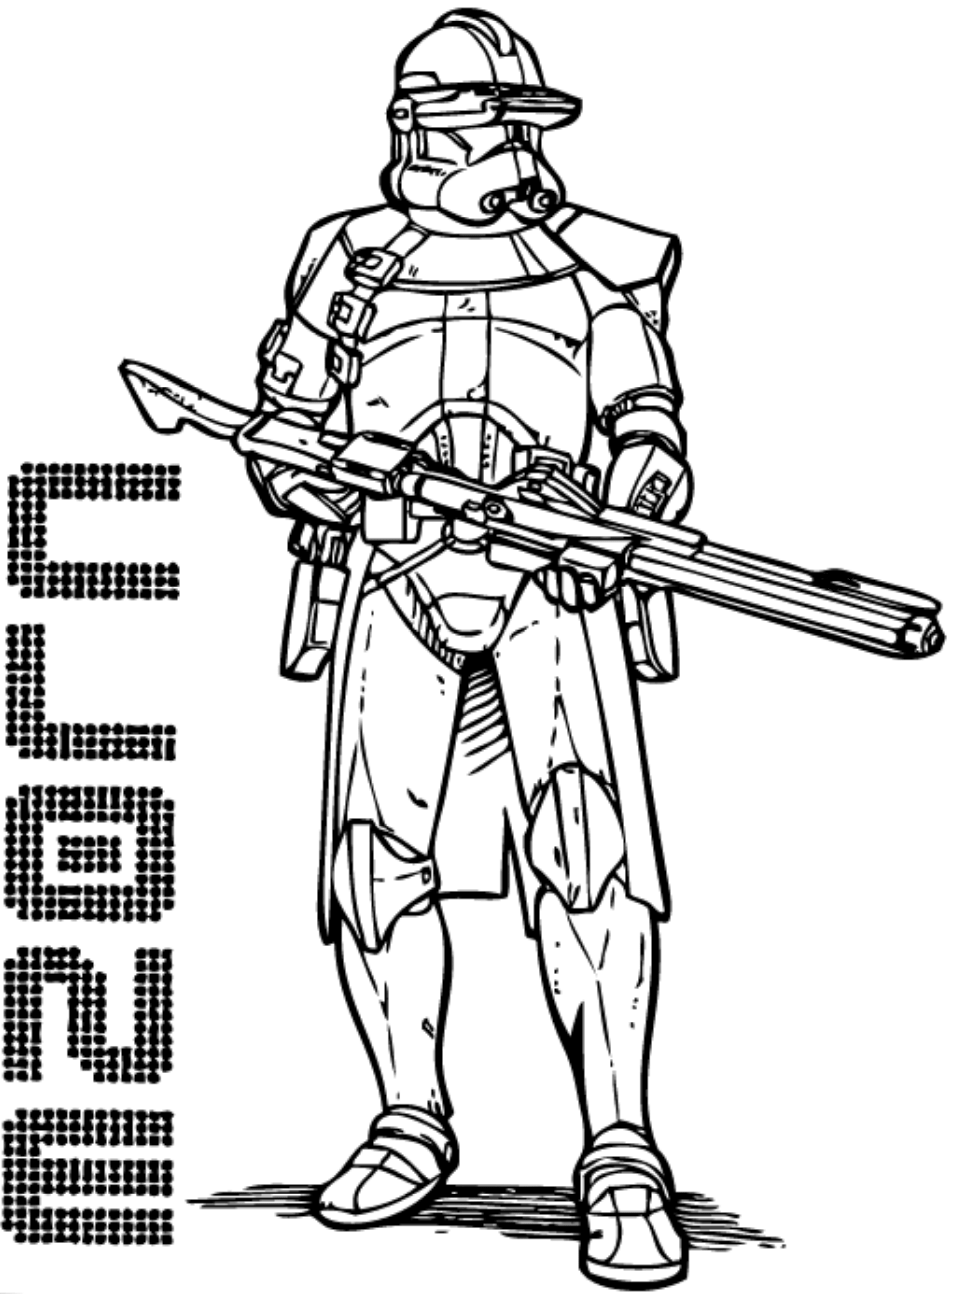 Star Wars Clone Wars Arc Trooper Coloring Pages